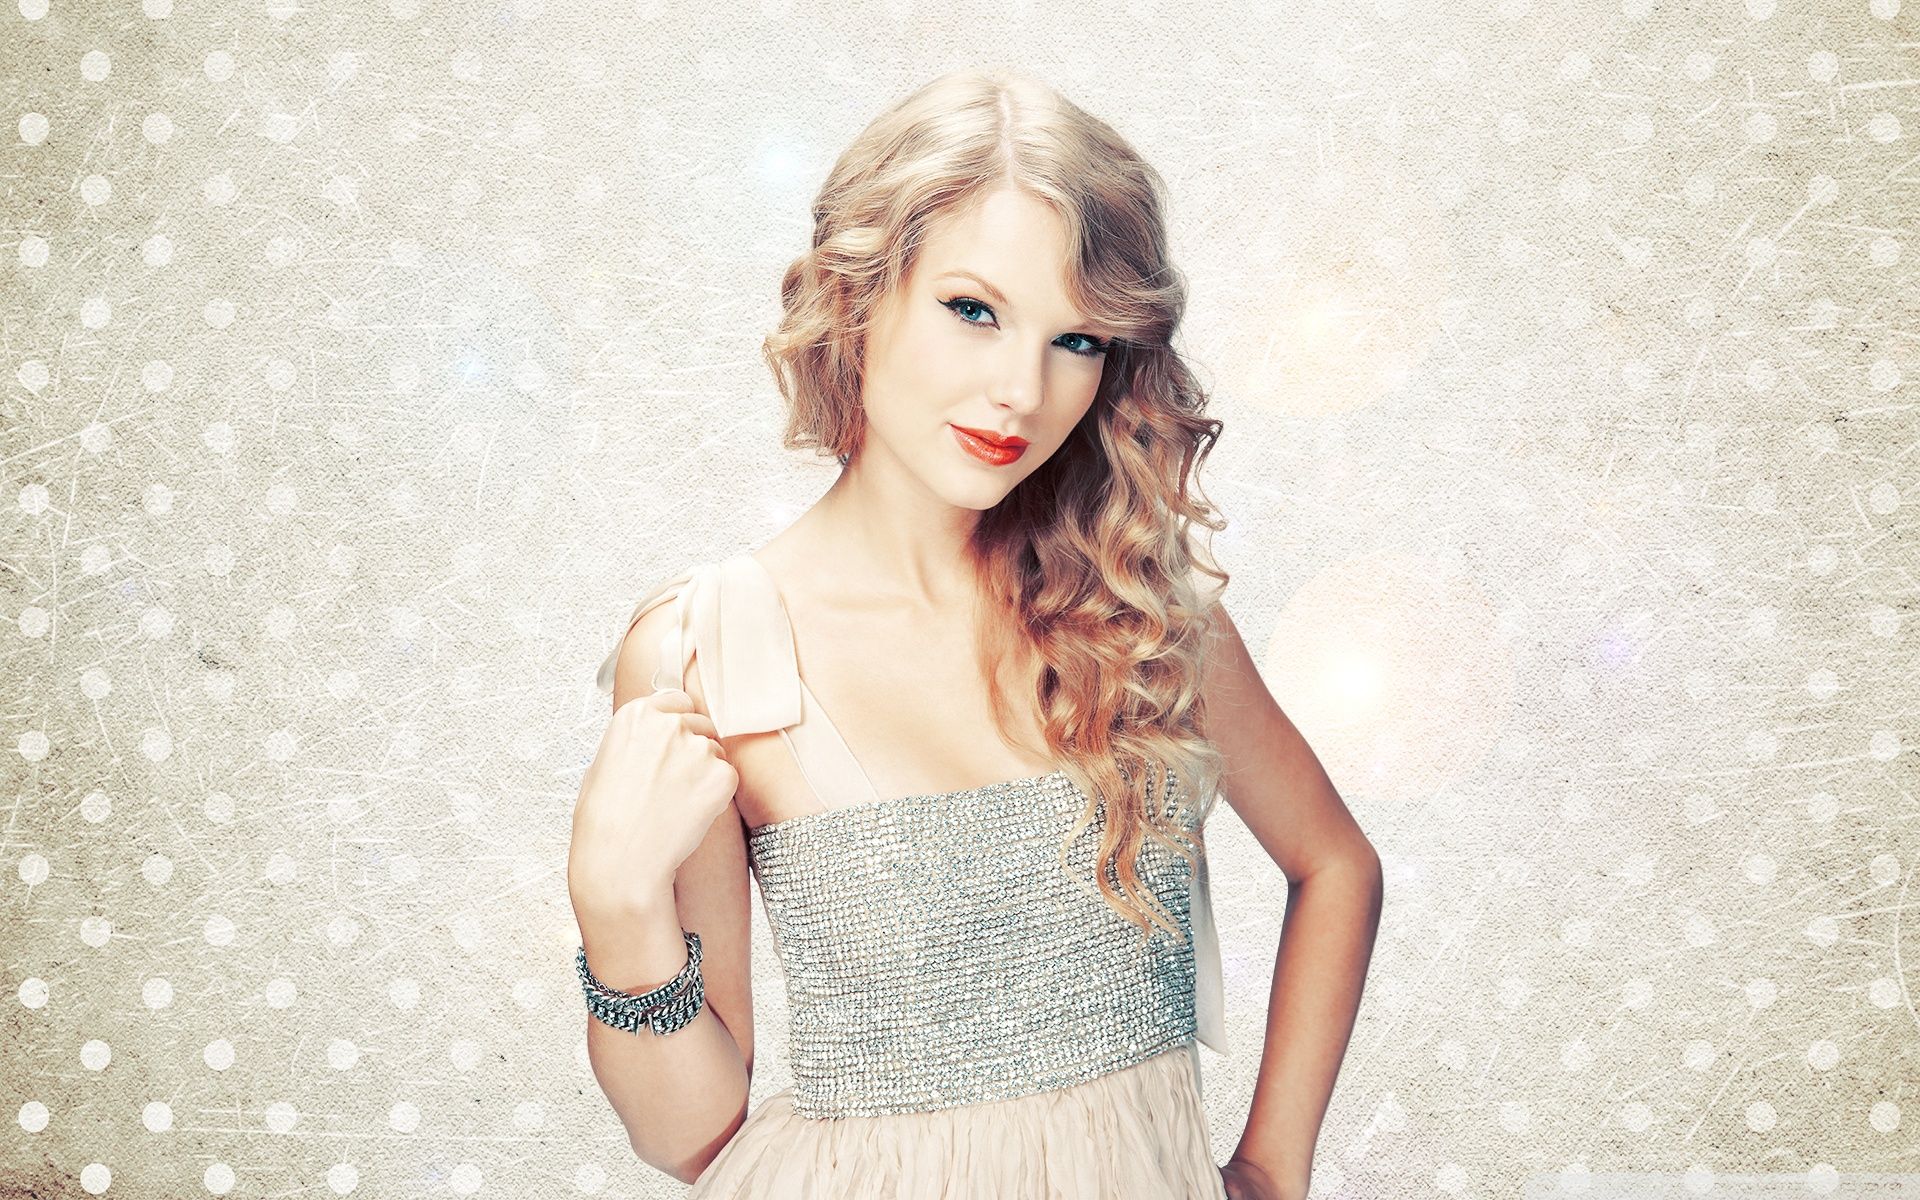 Taylor Swift Hd Wallpapers Group 81